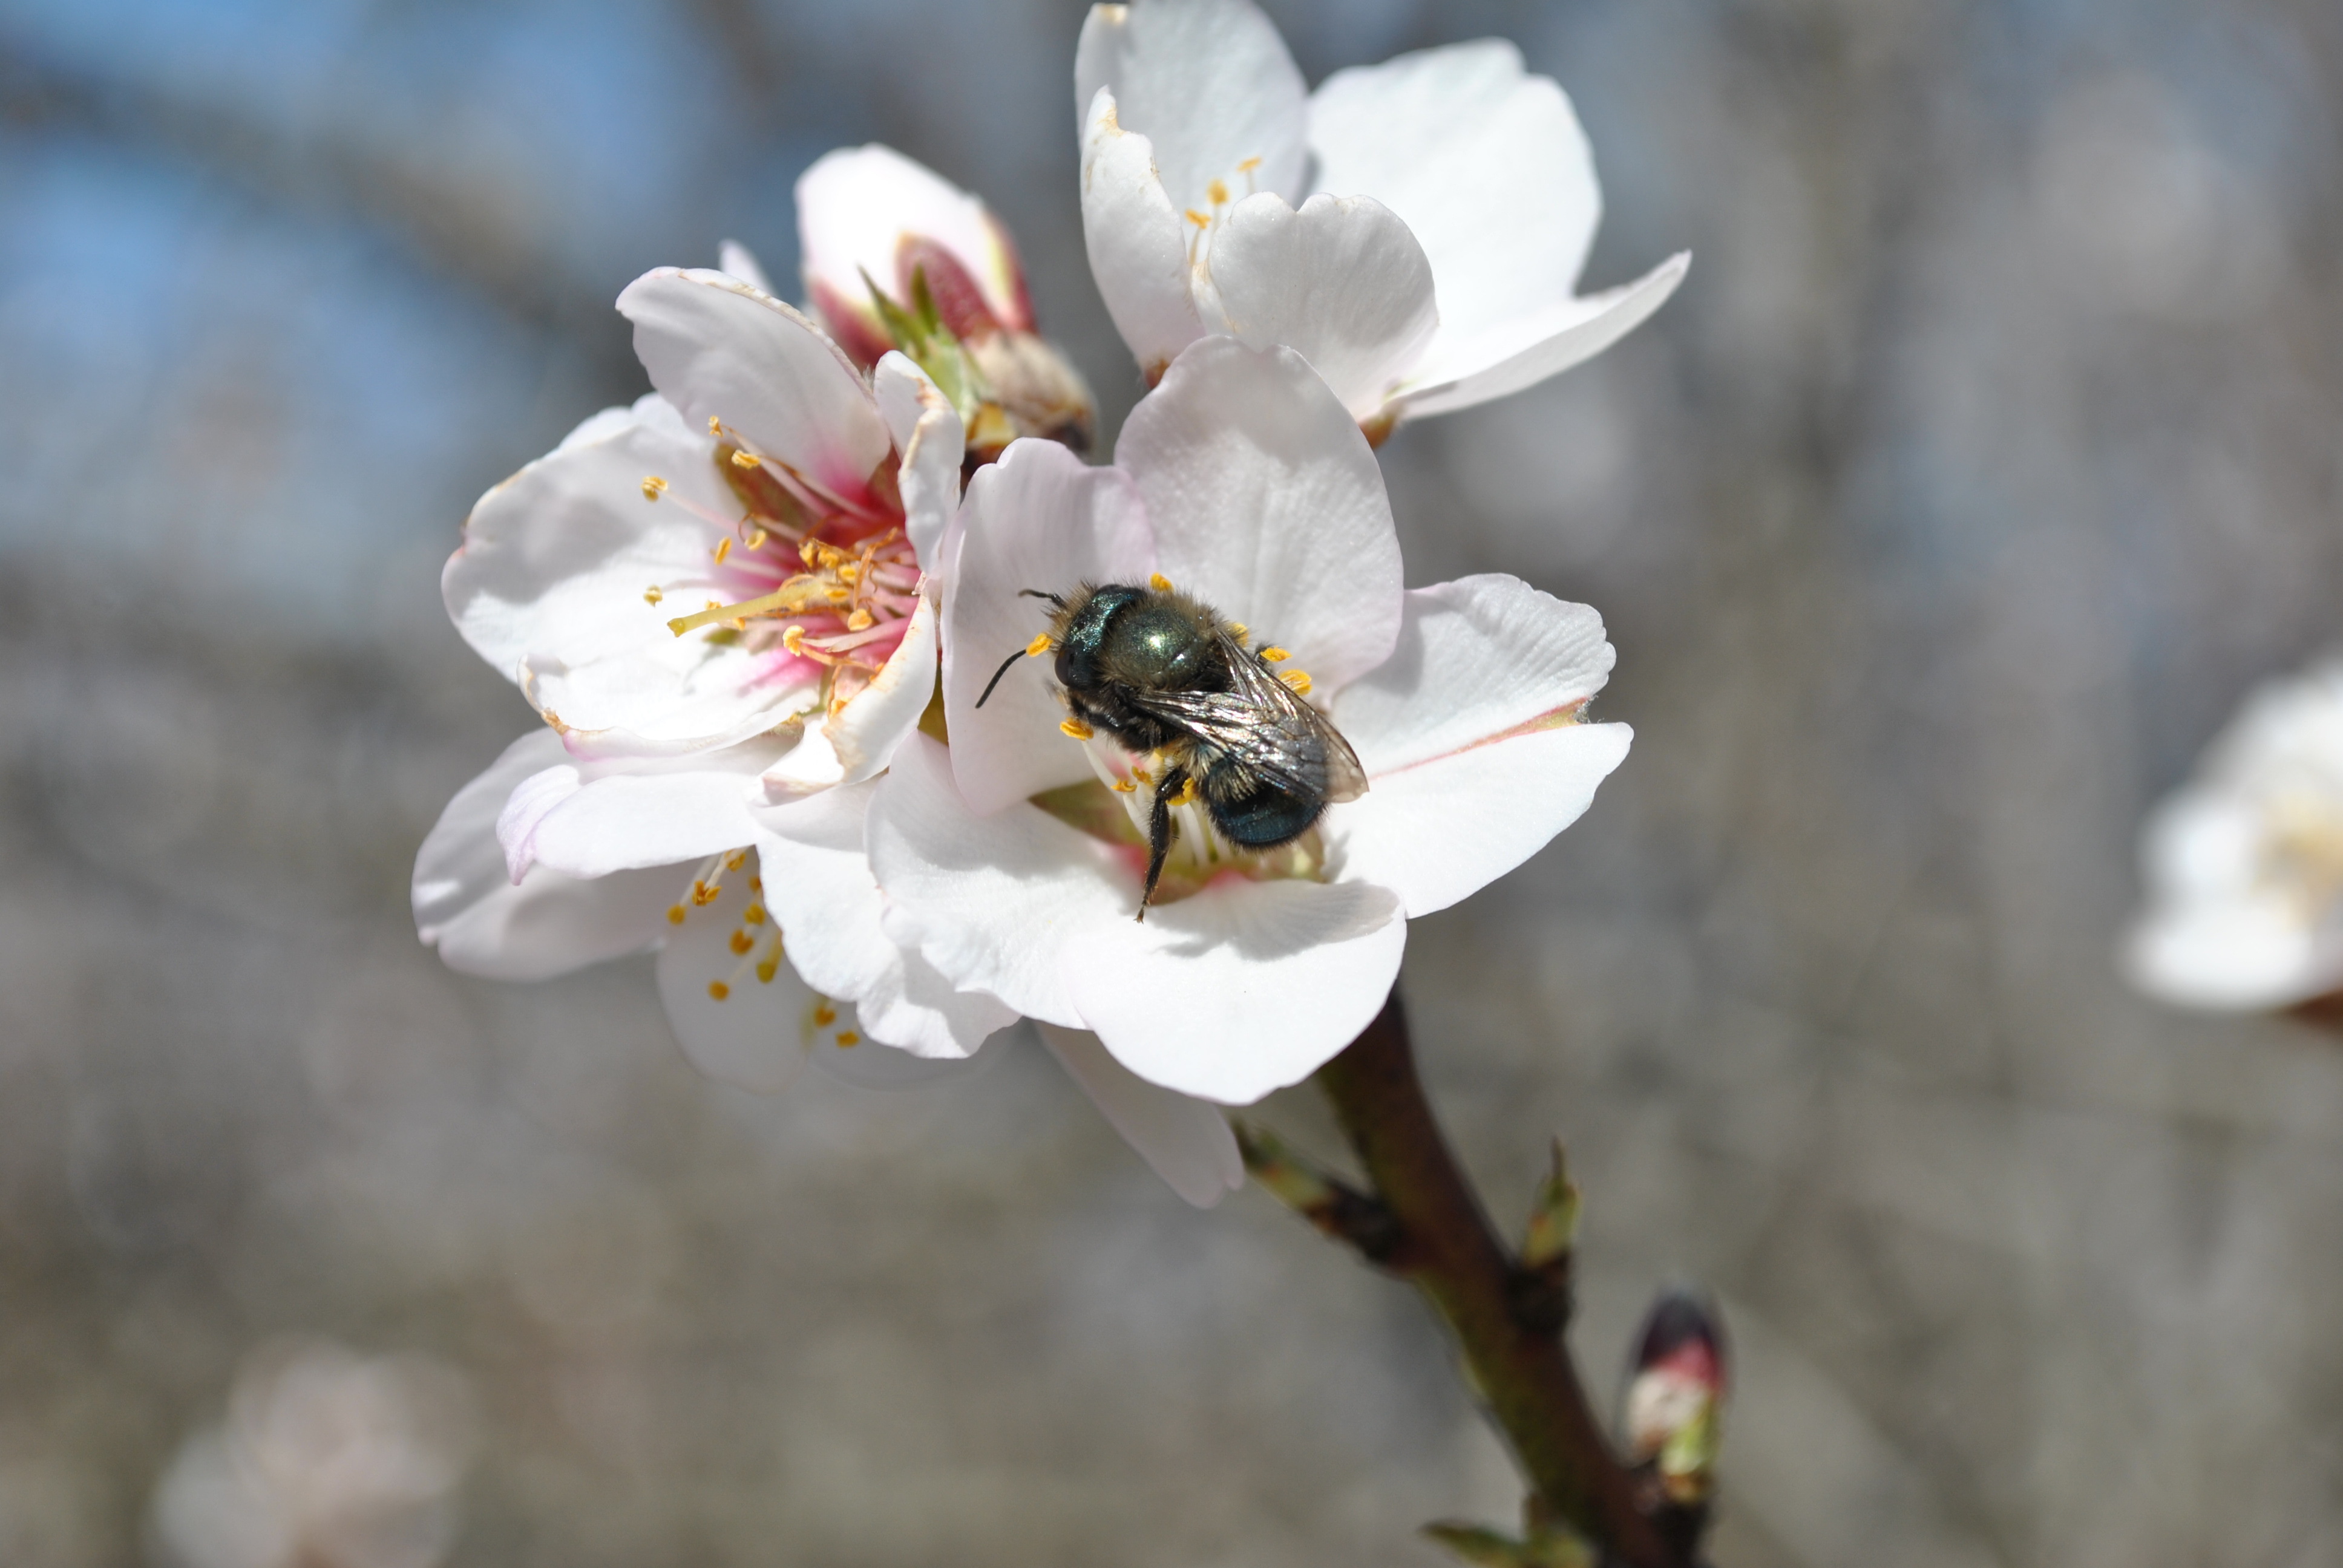 "A female blue orchard bee visits a while almond flower"